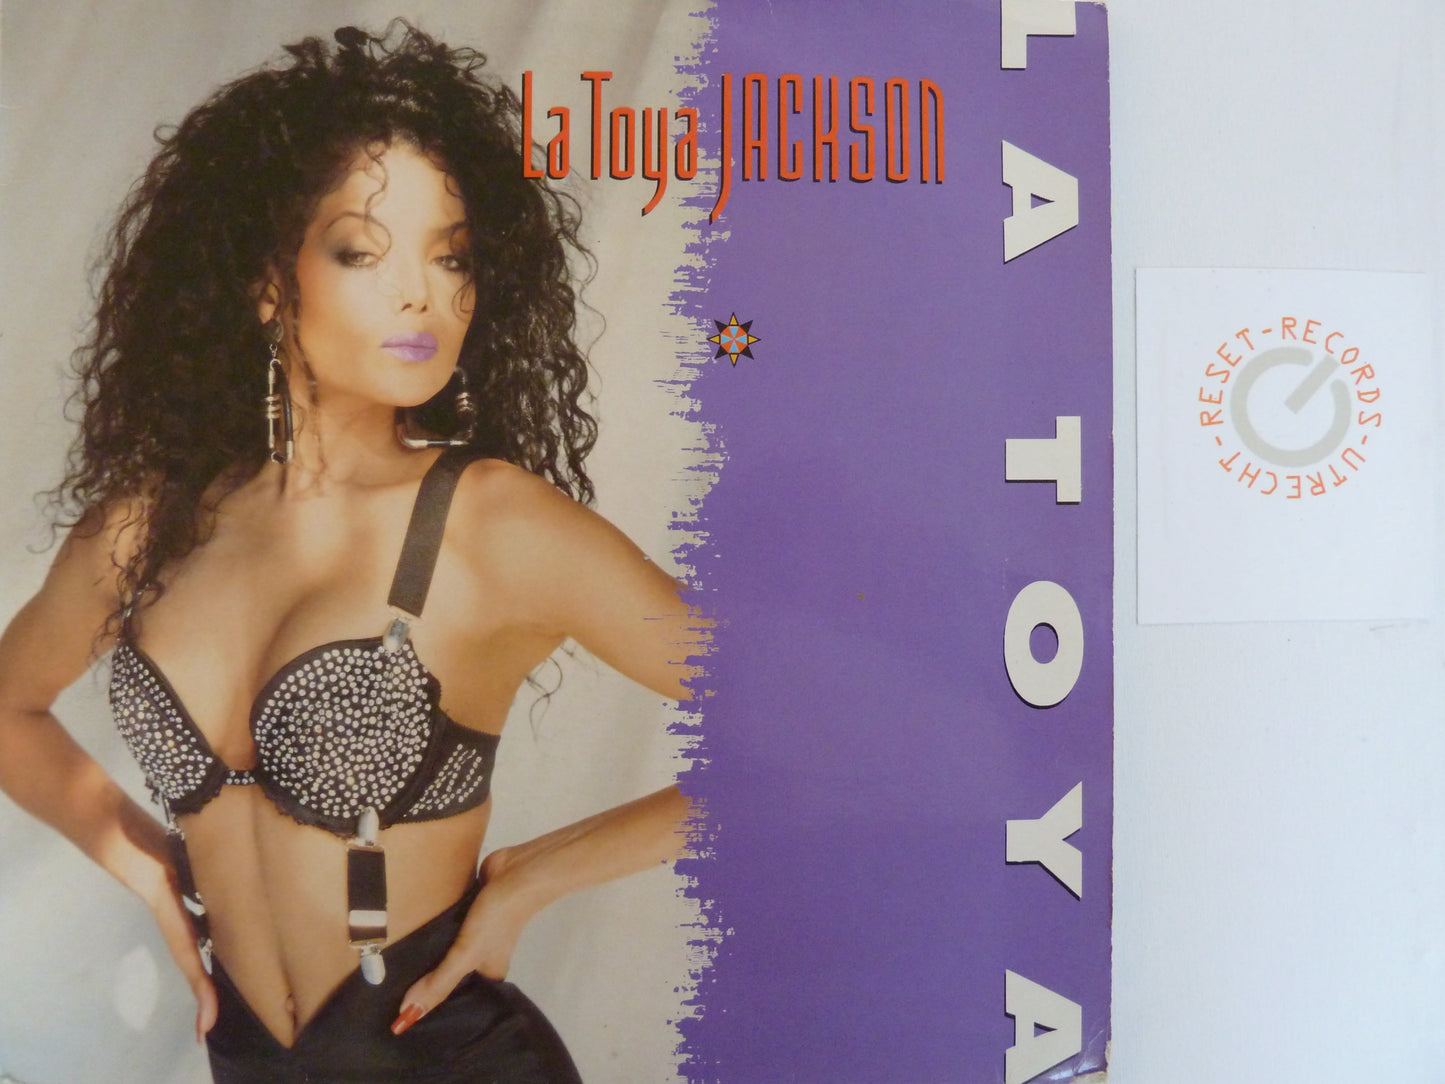 In the shadow of your famous family #4 inspired by La Toya Jackson – La Toya